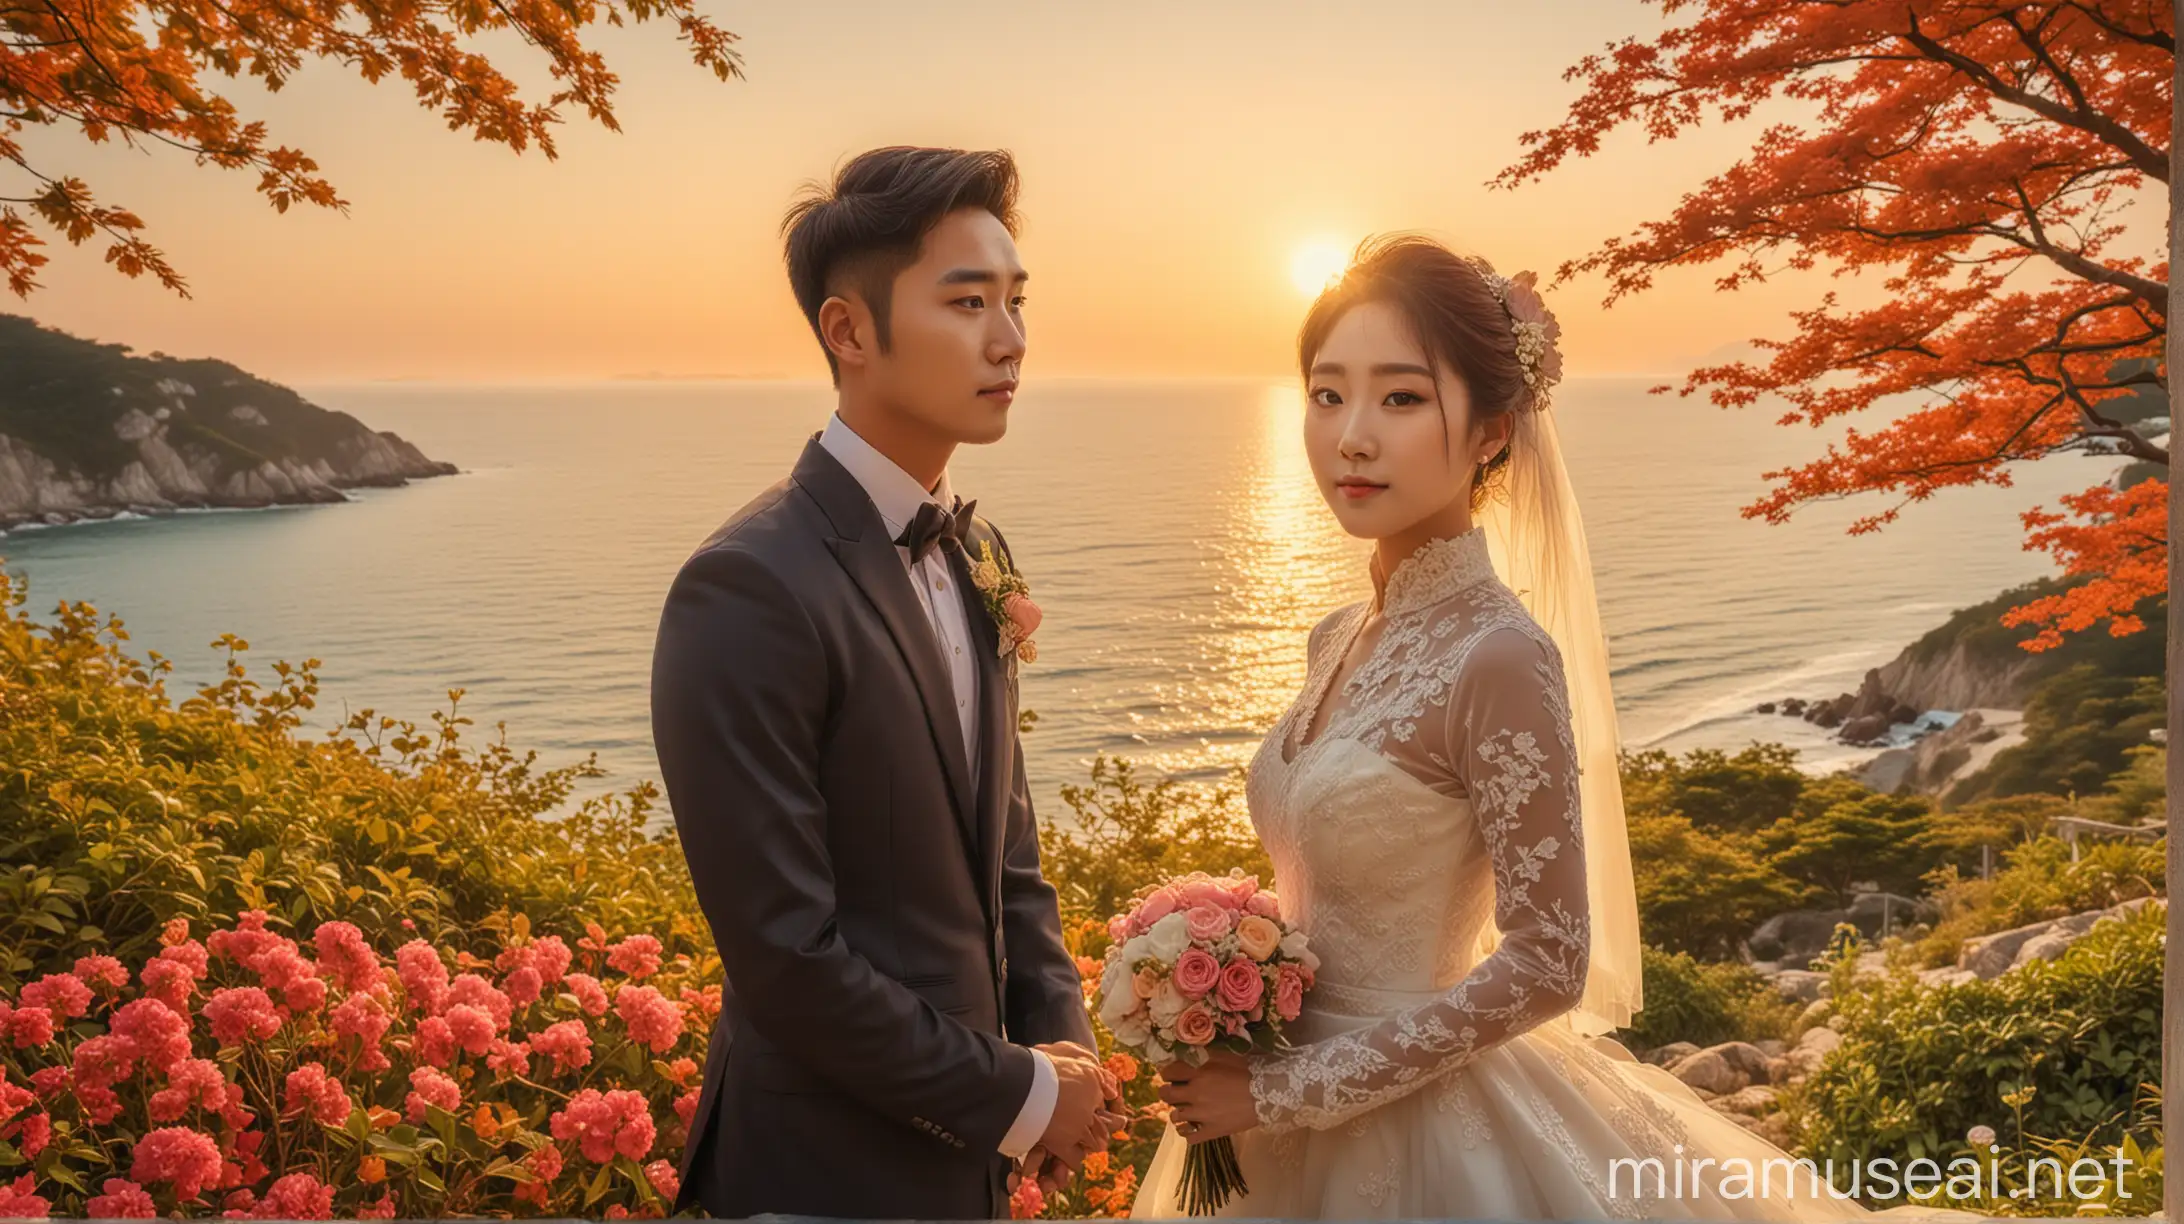 Handsome Groom and Beautiful Korean Bride Overlooking the Sea in Vibrant Tabloid Style